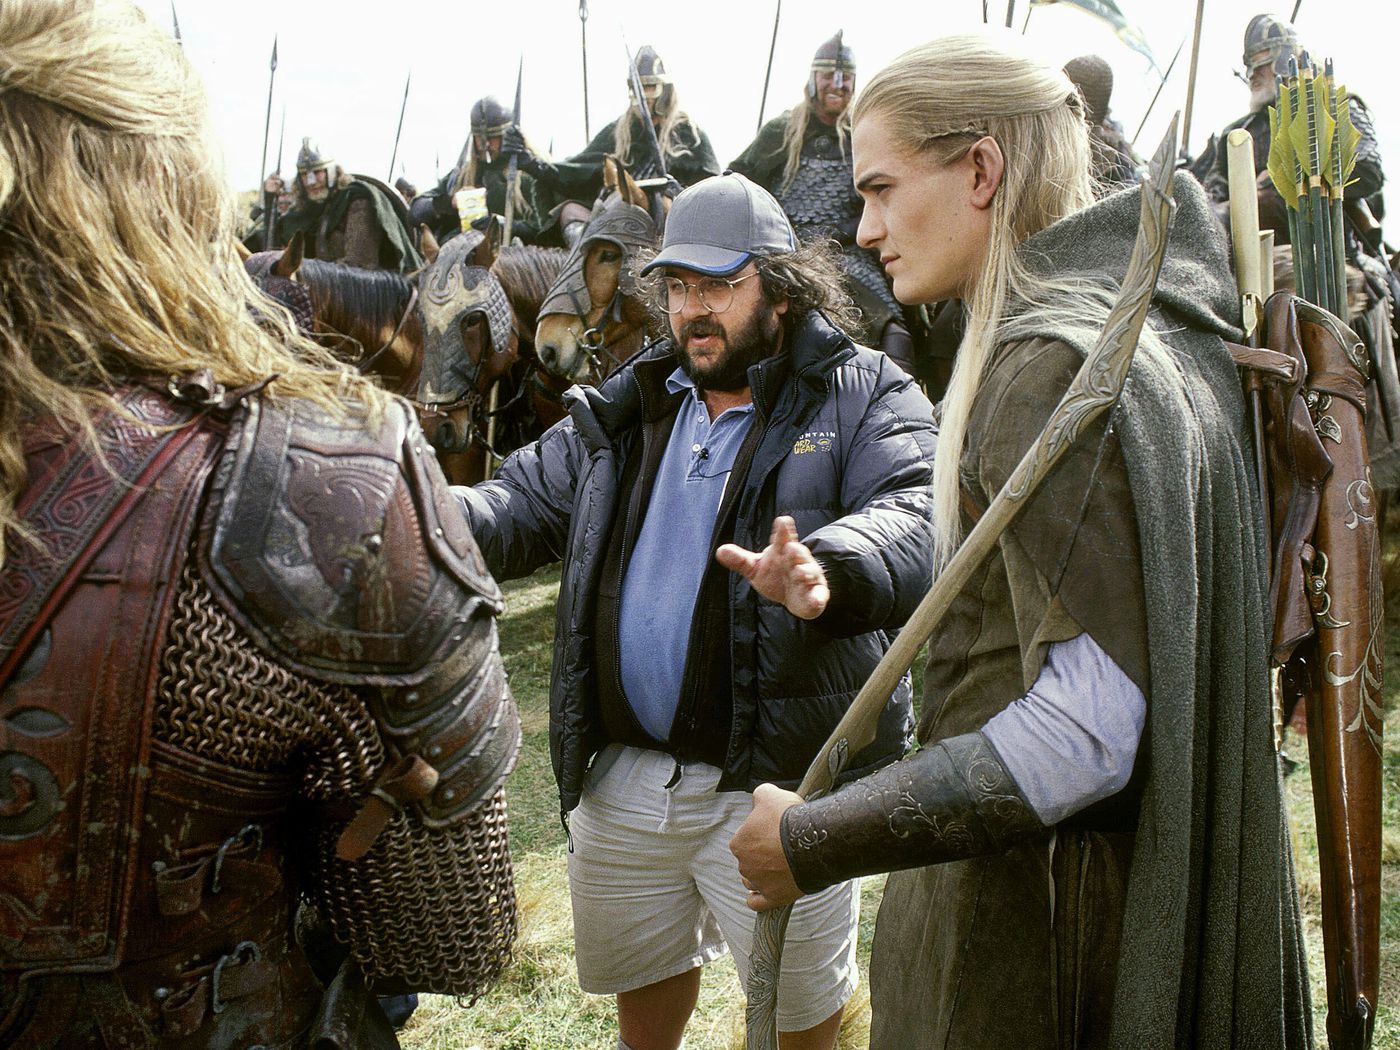 Lord of the Rings - Production